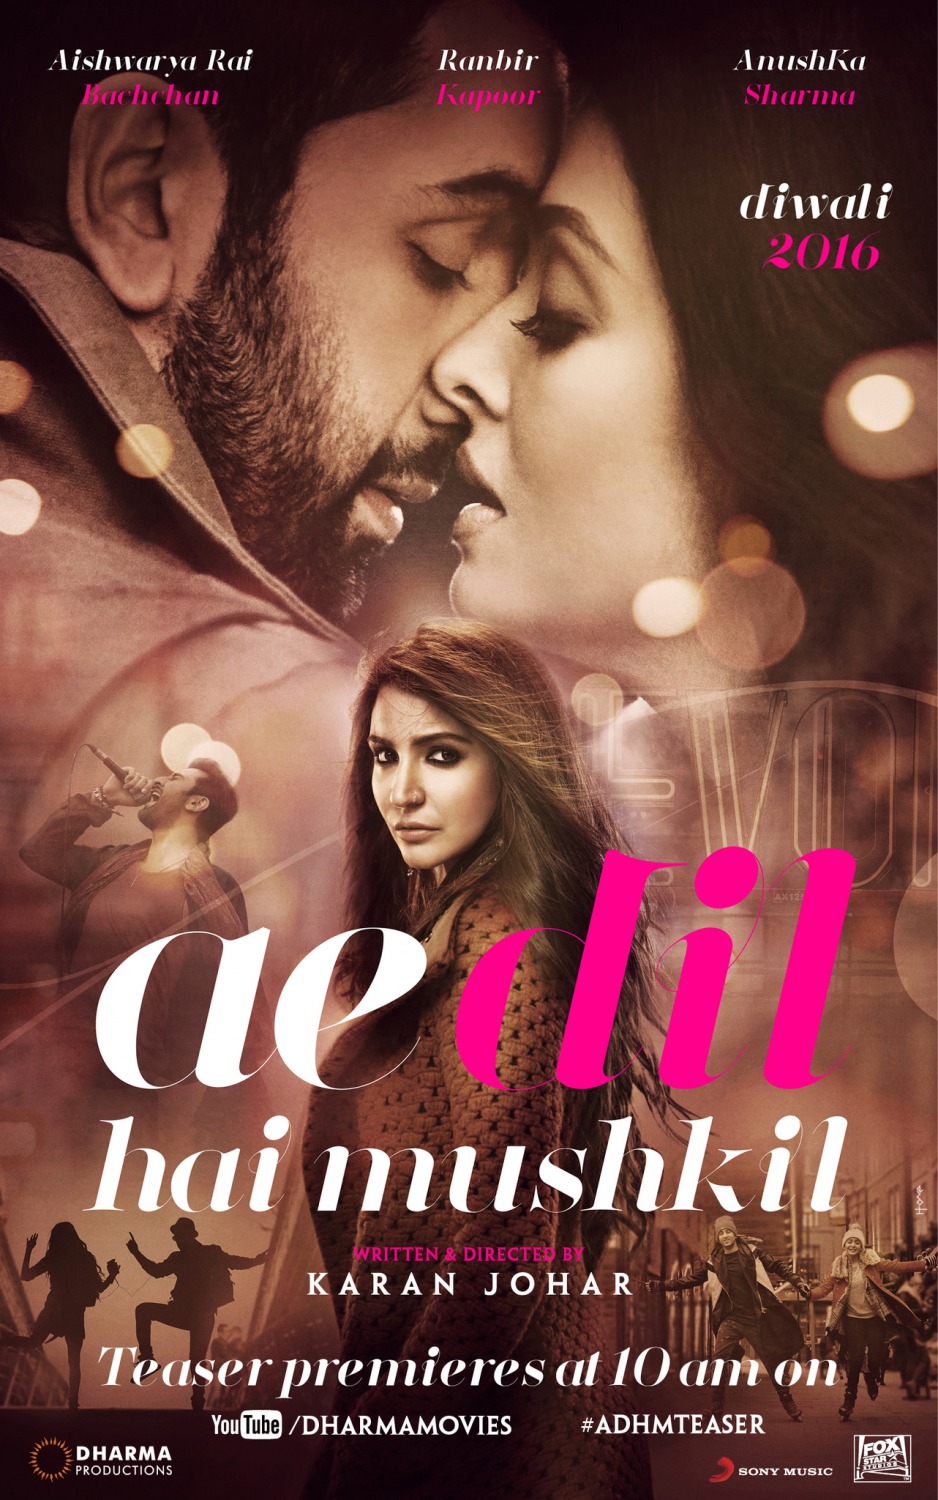 Extra Large Movie Poster Image for Ae Dil Hai Mushkil 